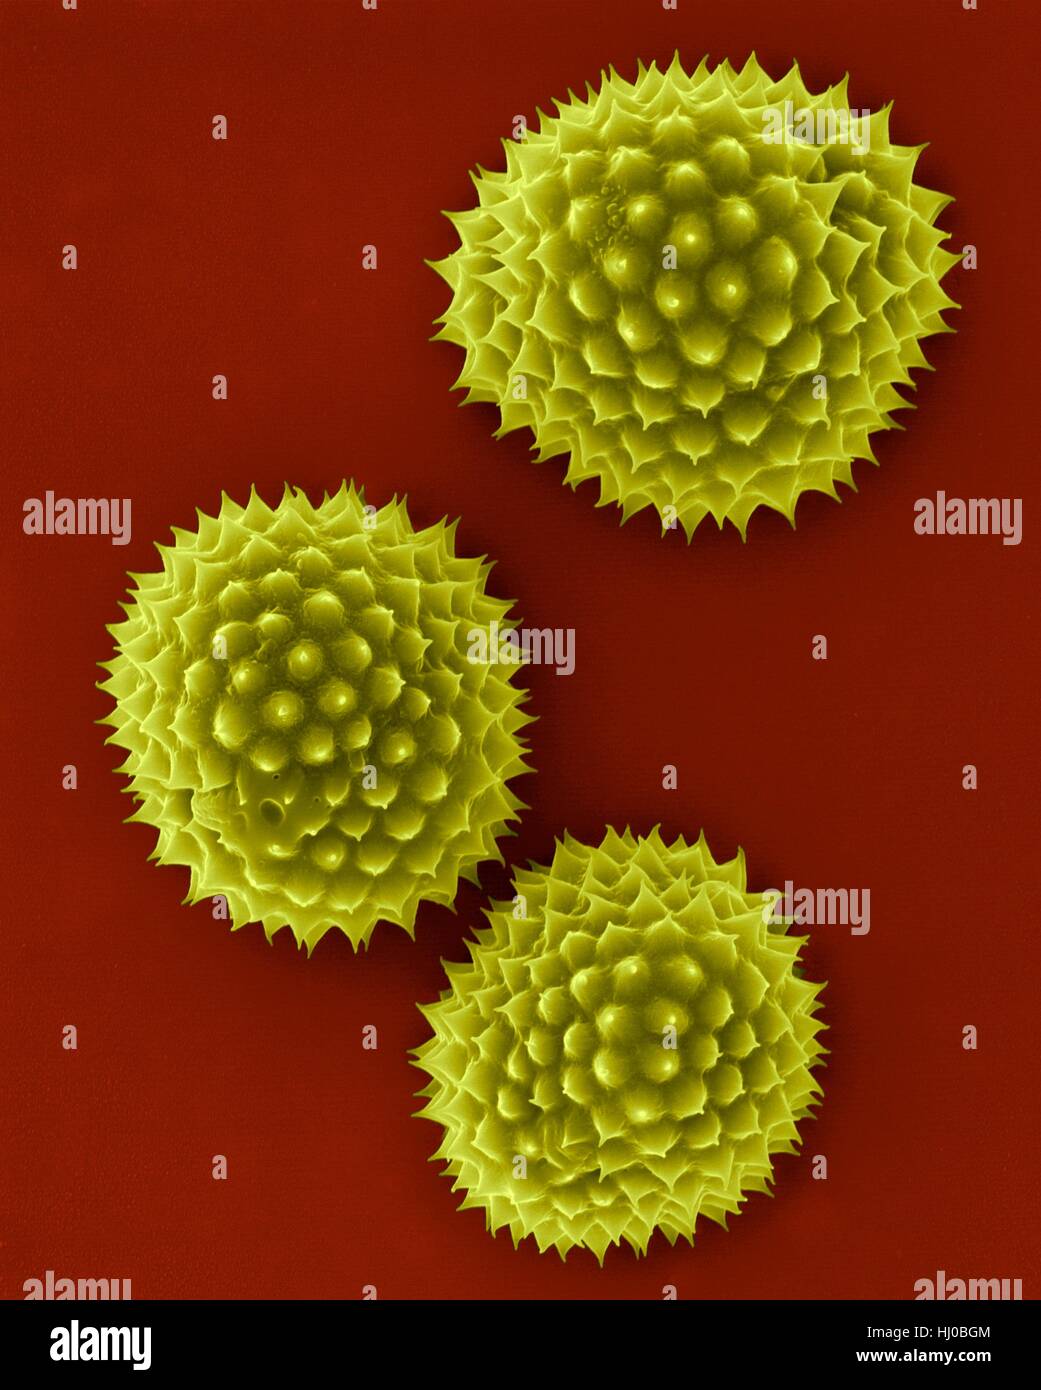 Ragweed pollen (Ambrosia psilostachya),coloured scanning electron micrograph (SEM).This pollen is allergen.Ragweed is main cause of weed allergies.Ragweed pollen is notorious for causing allergic reactions in humans,specifically allergic rhinitis.Up to half of all cases of pollen-related allergic Stock Photo